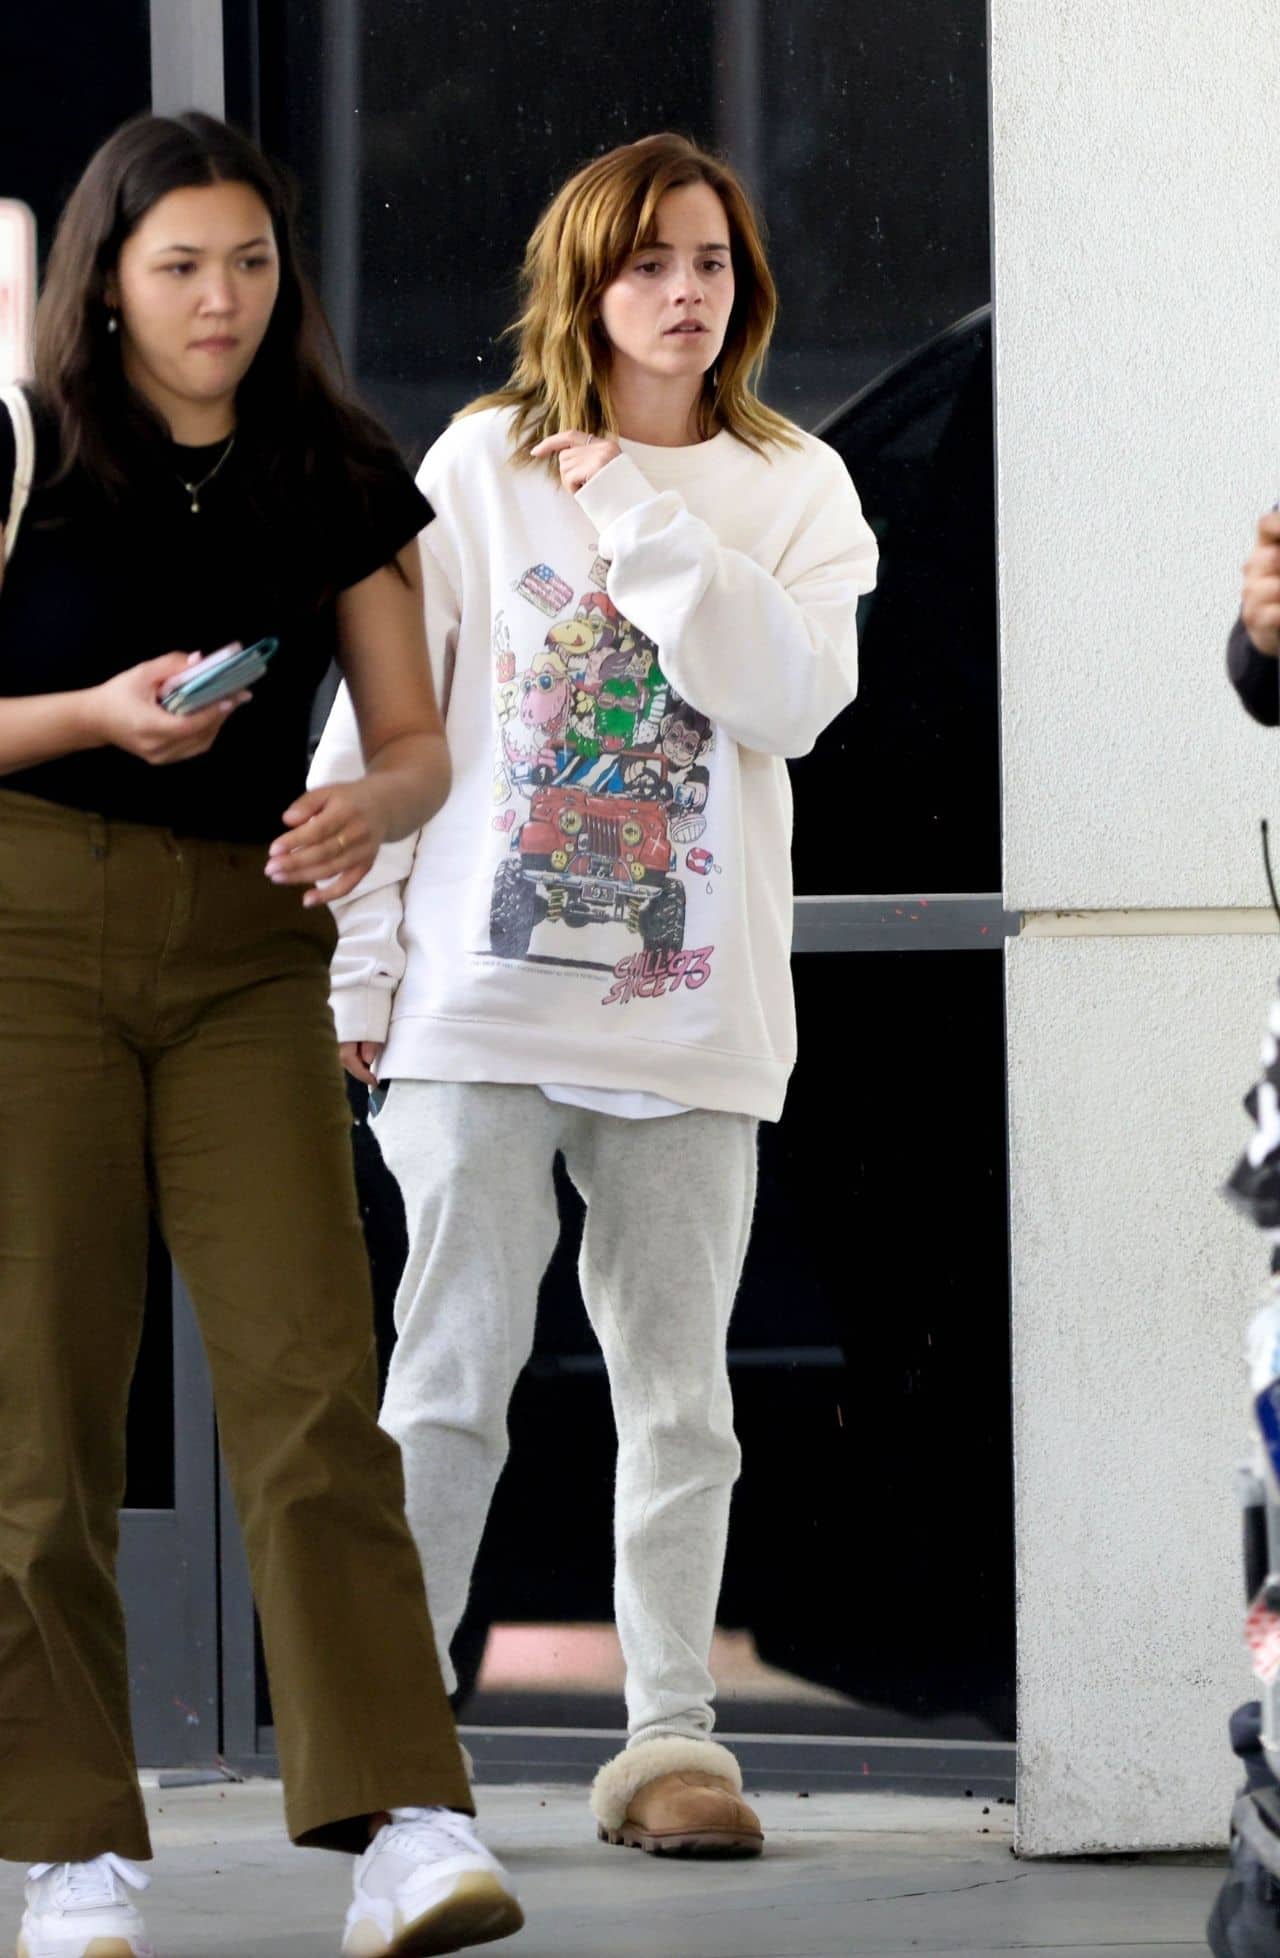 Emma Watson in a Comfy Playful Outfit at the Airport in Van Nuys